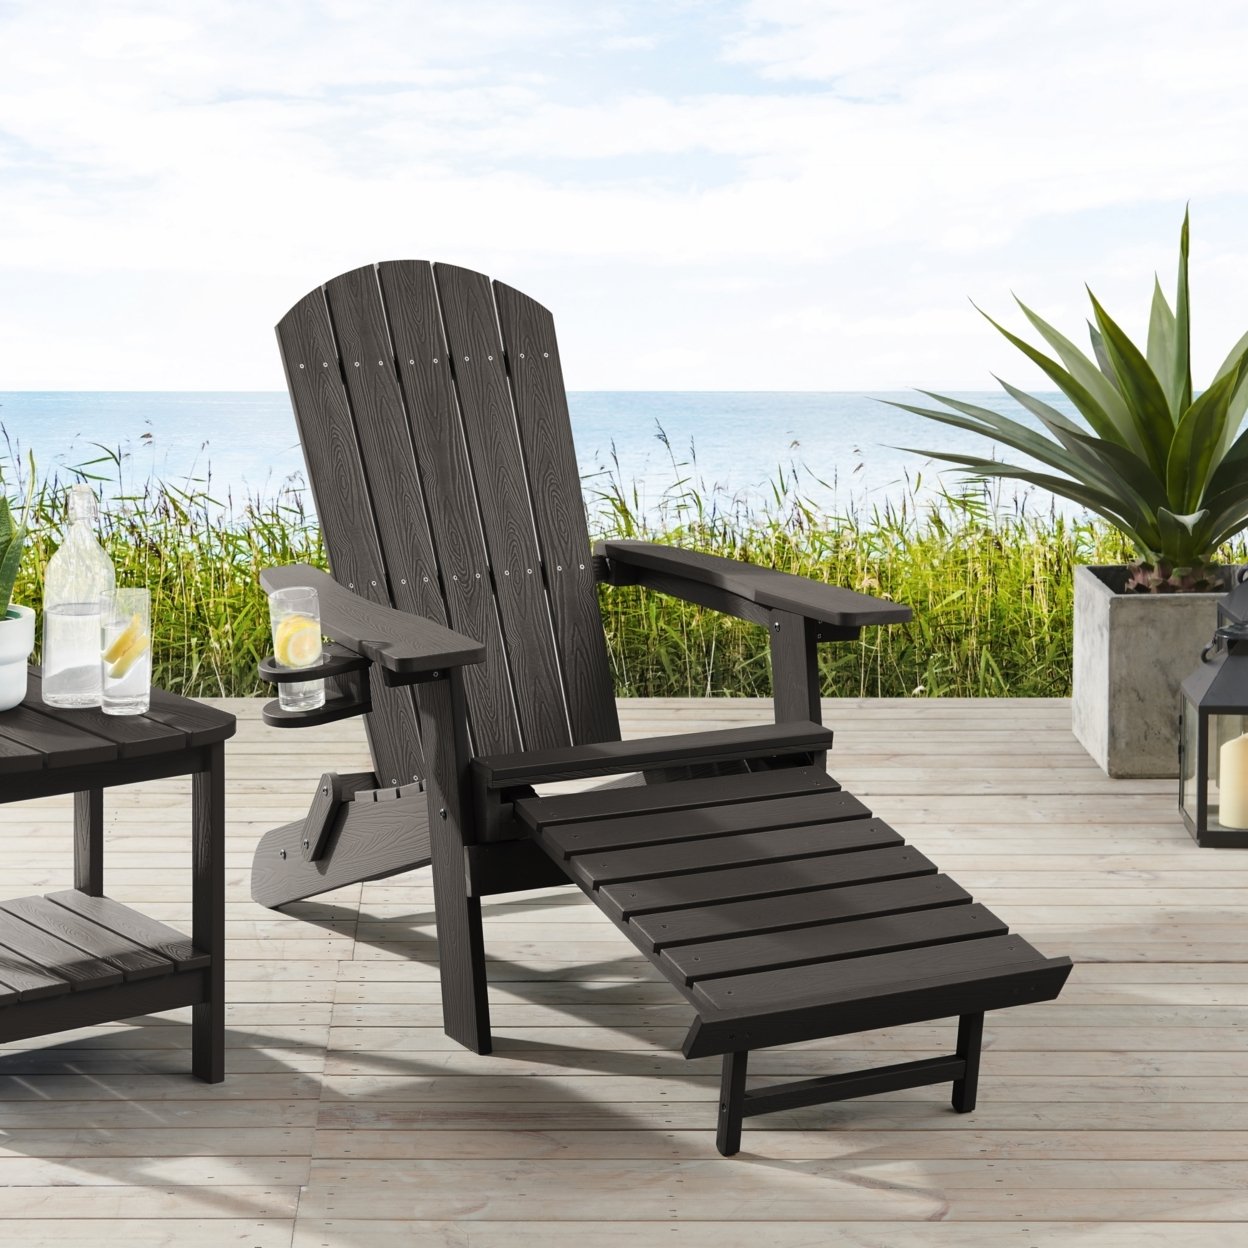 Rider Outdoor Adirondack Chair,Retractable/Pull-out Footrest, Cup Holder - Black